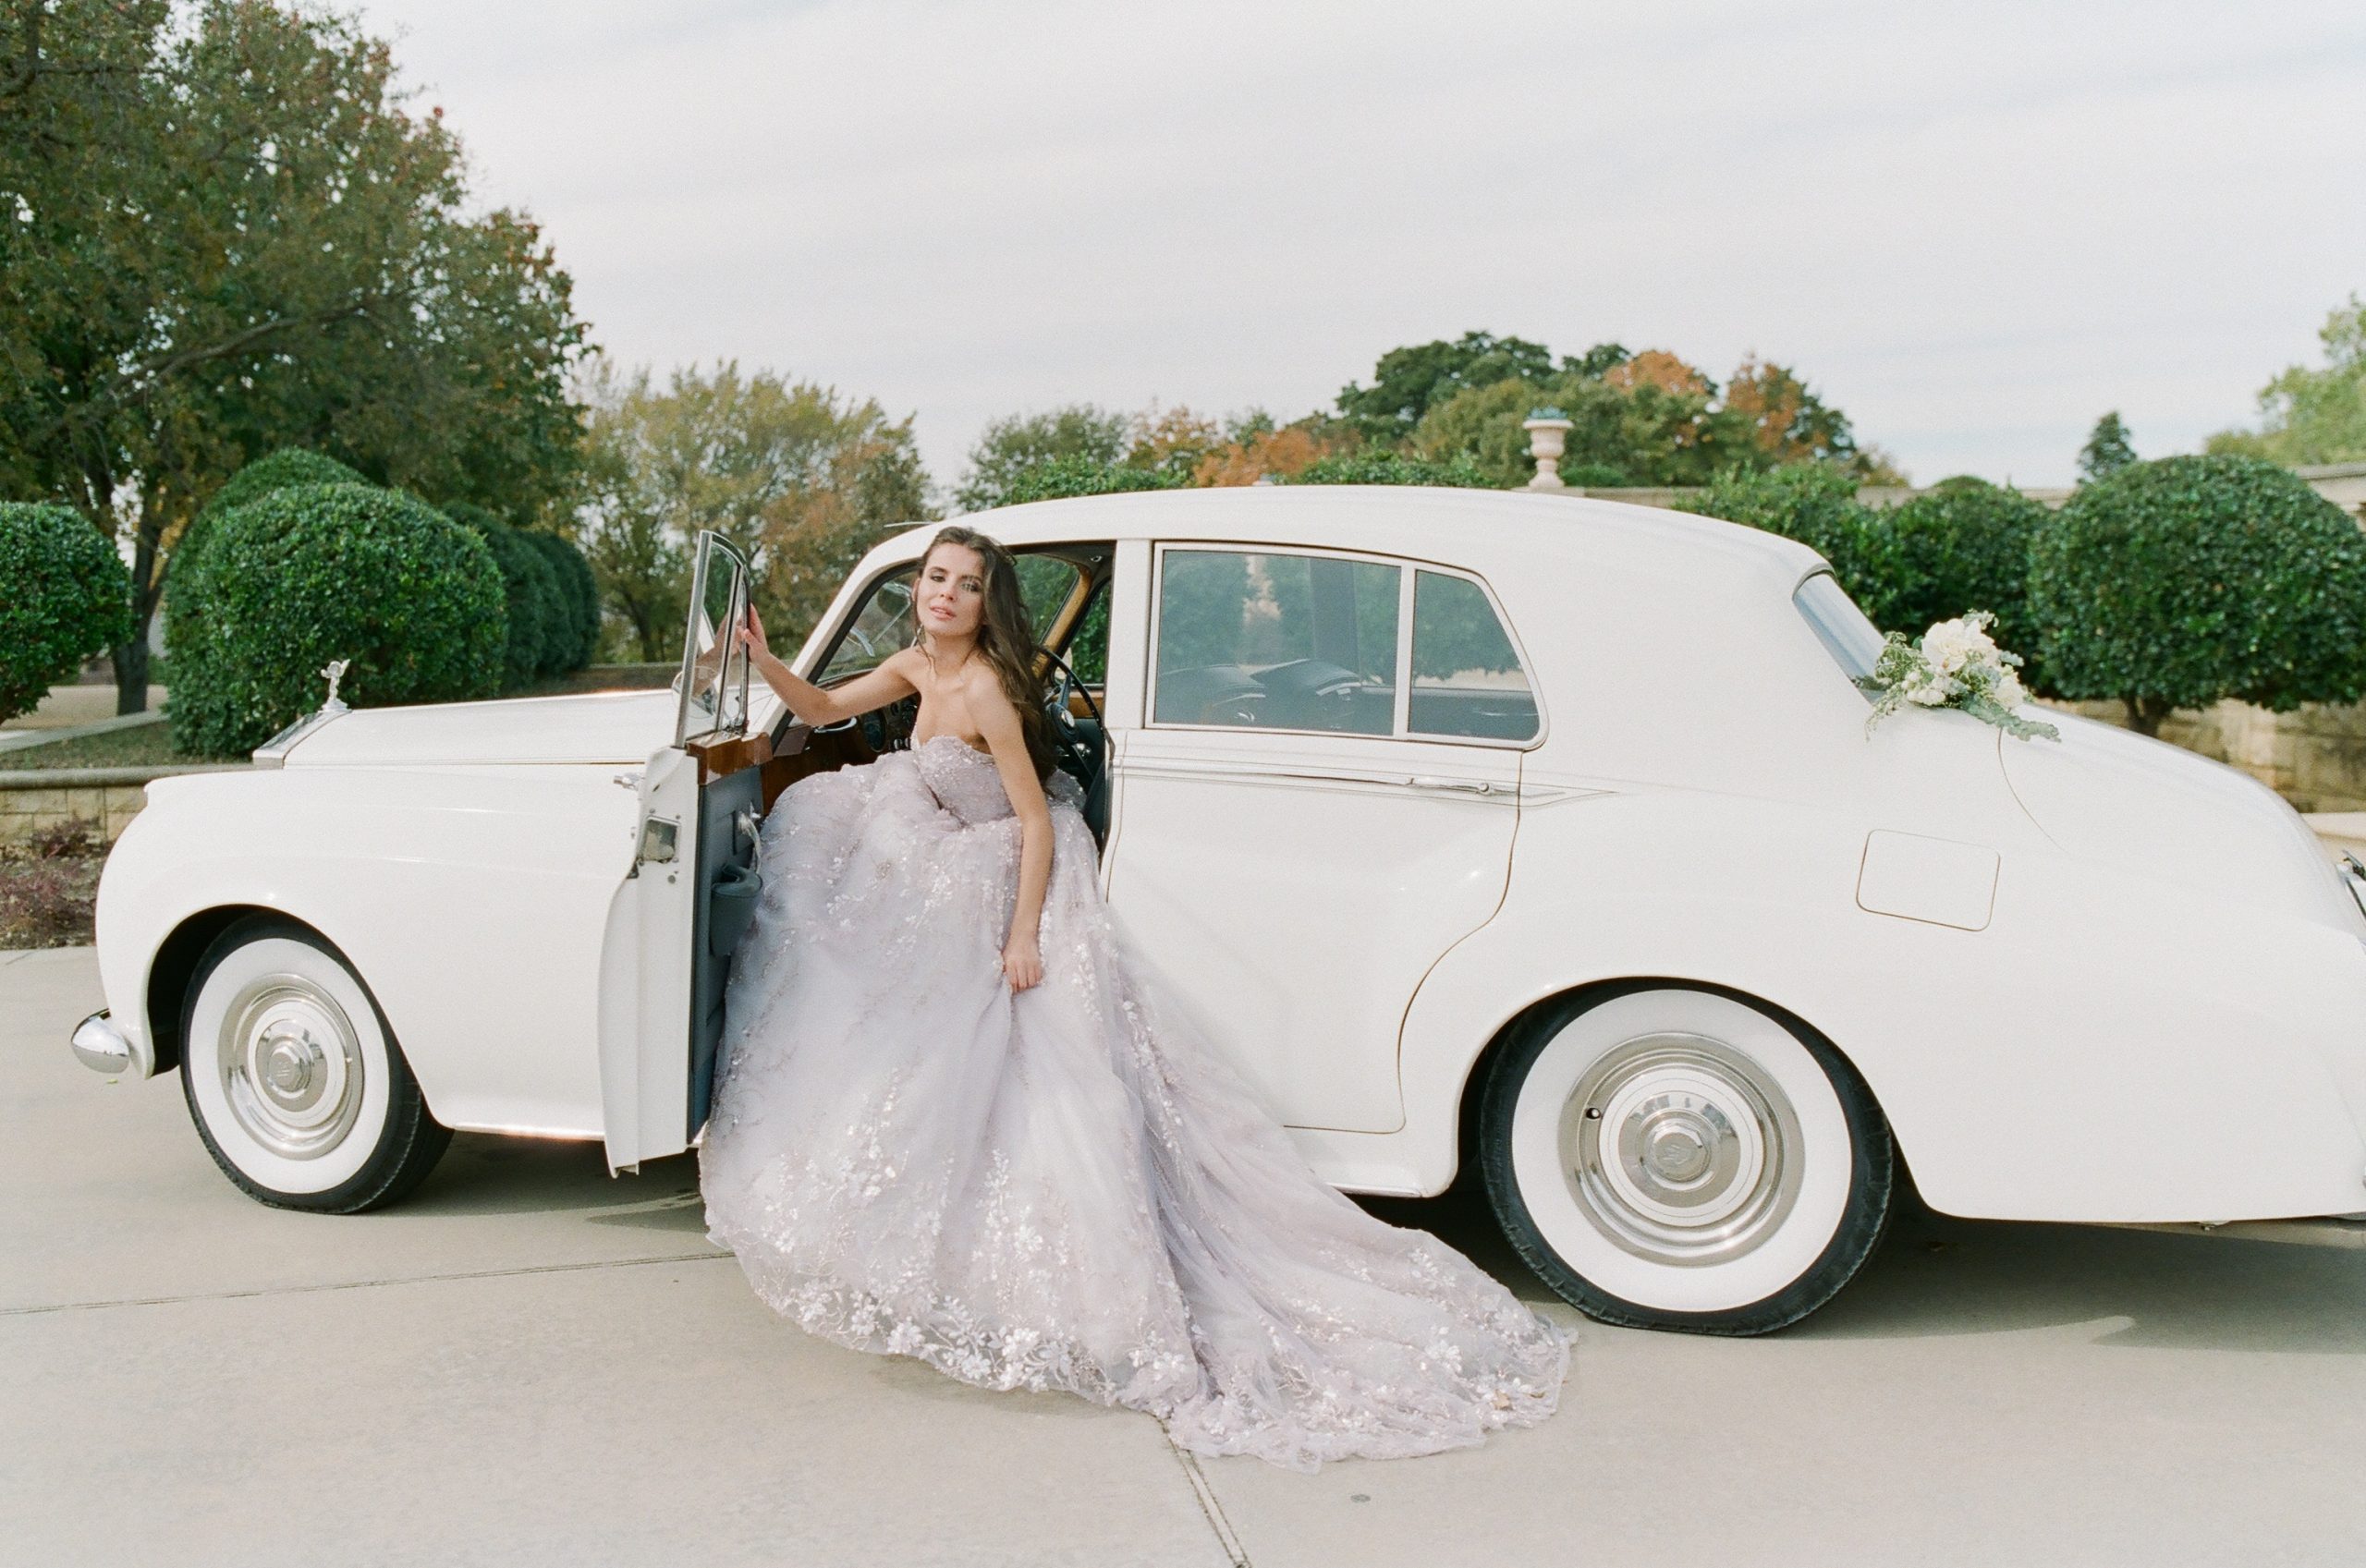 Bride in Lavender Couture Wedding Dress Sitting in Vintage Car Photo